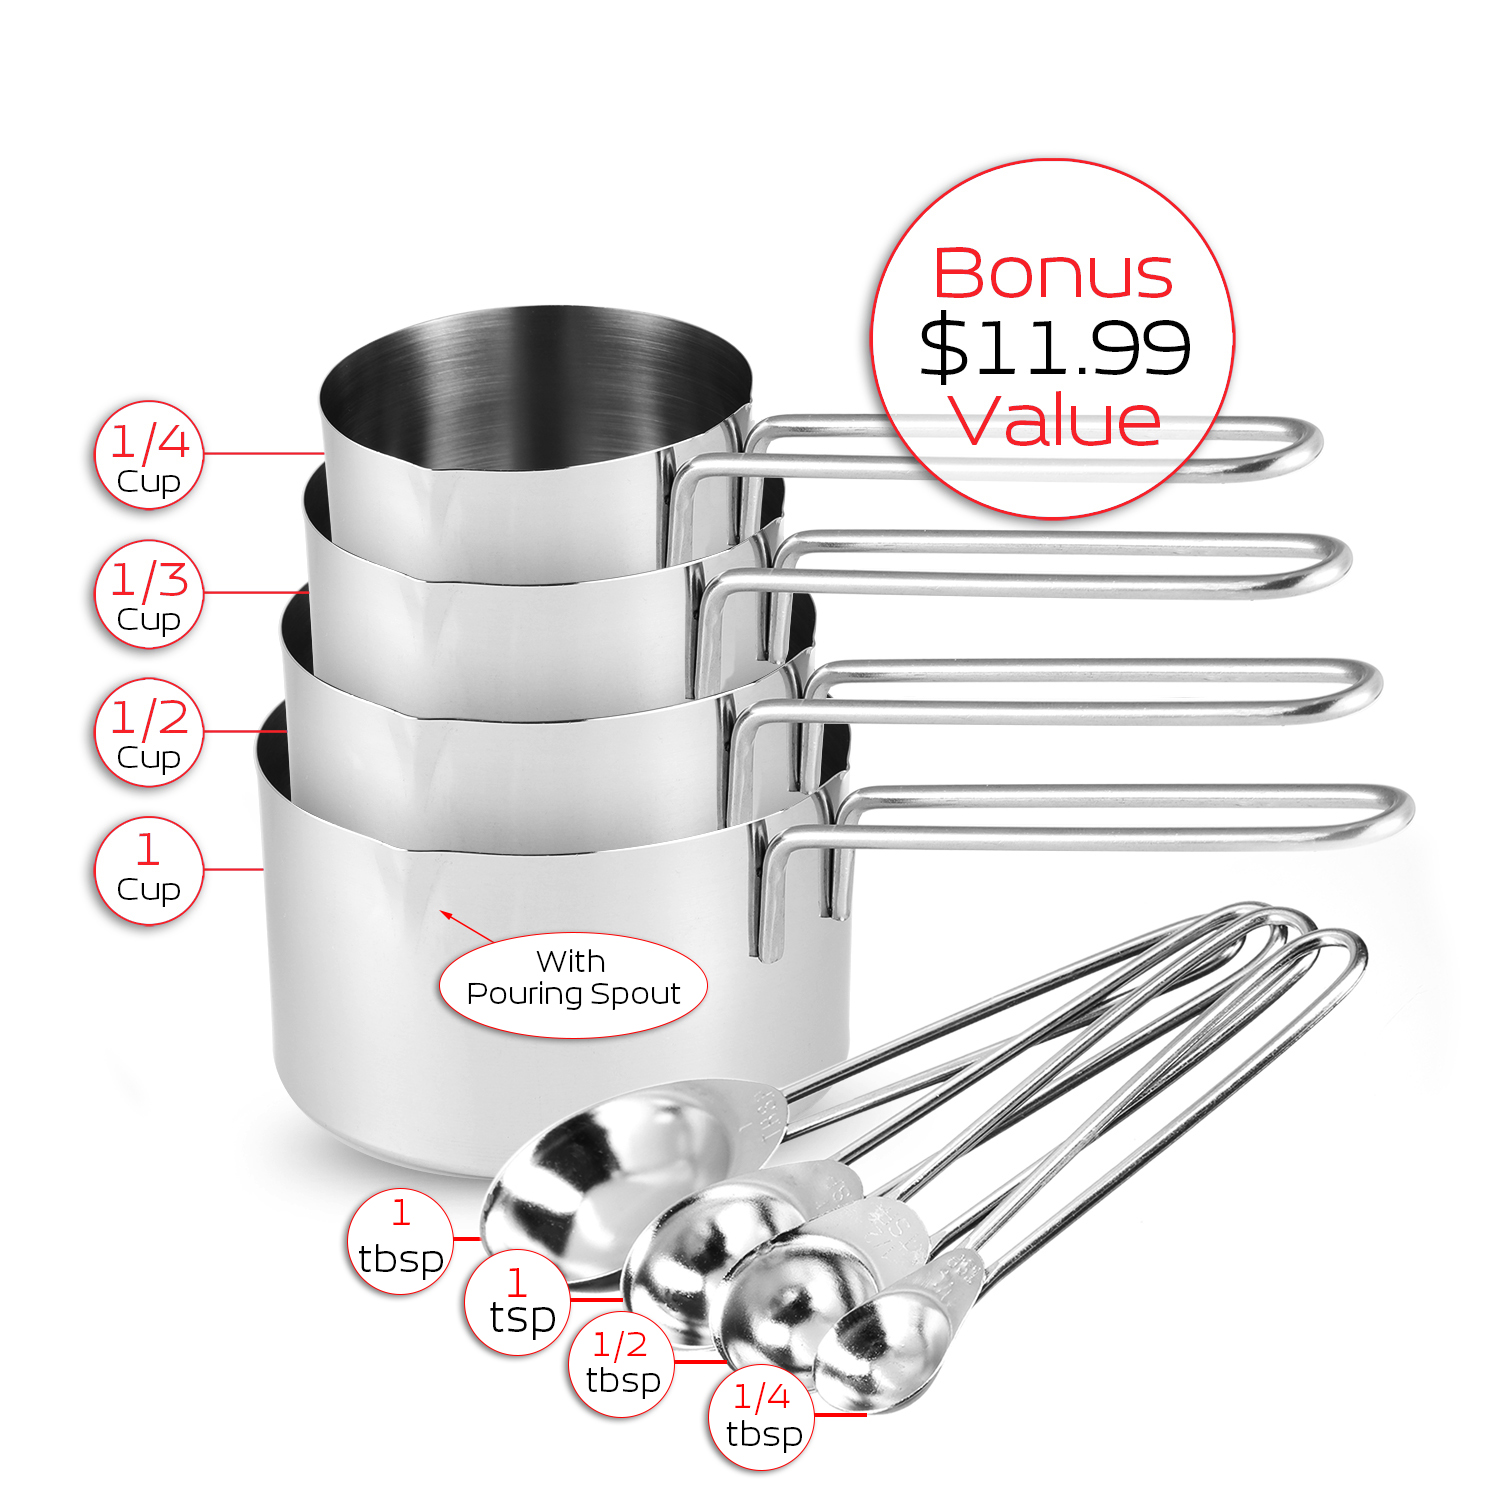  ENLOY Stainless Steel Measuring Cups and Spoons Set of